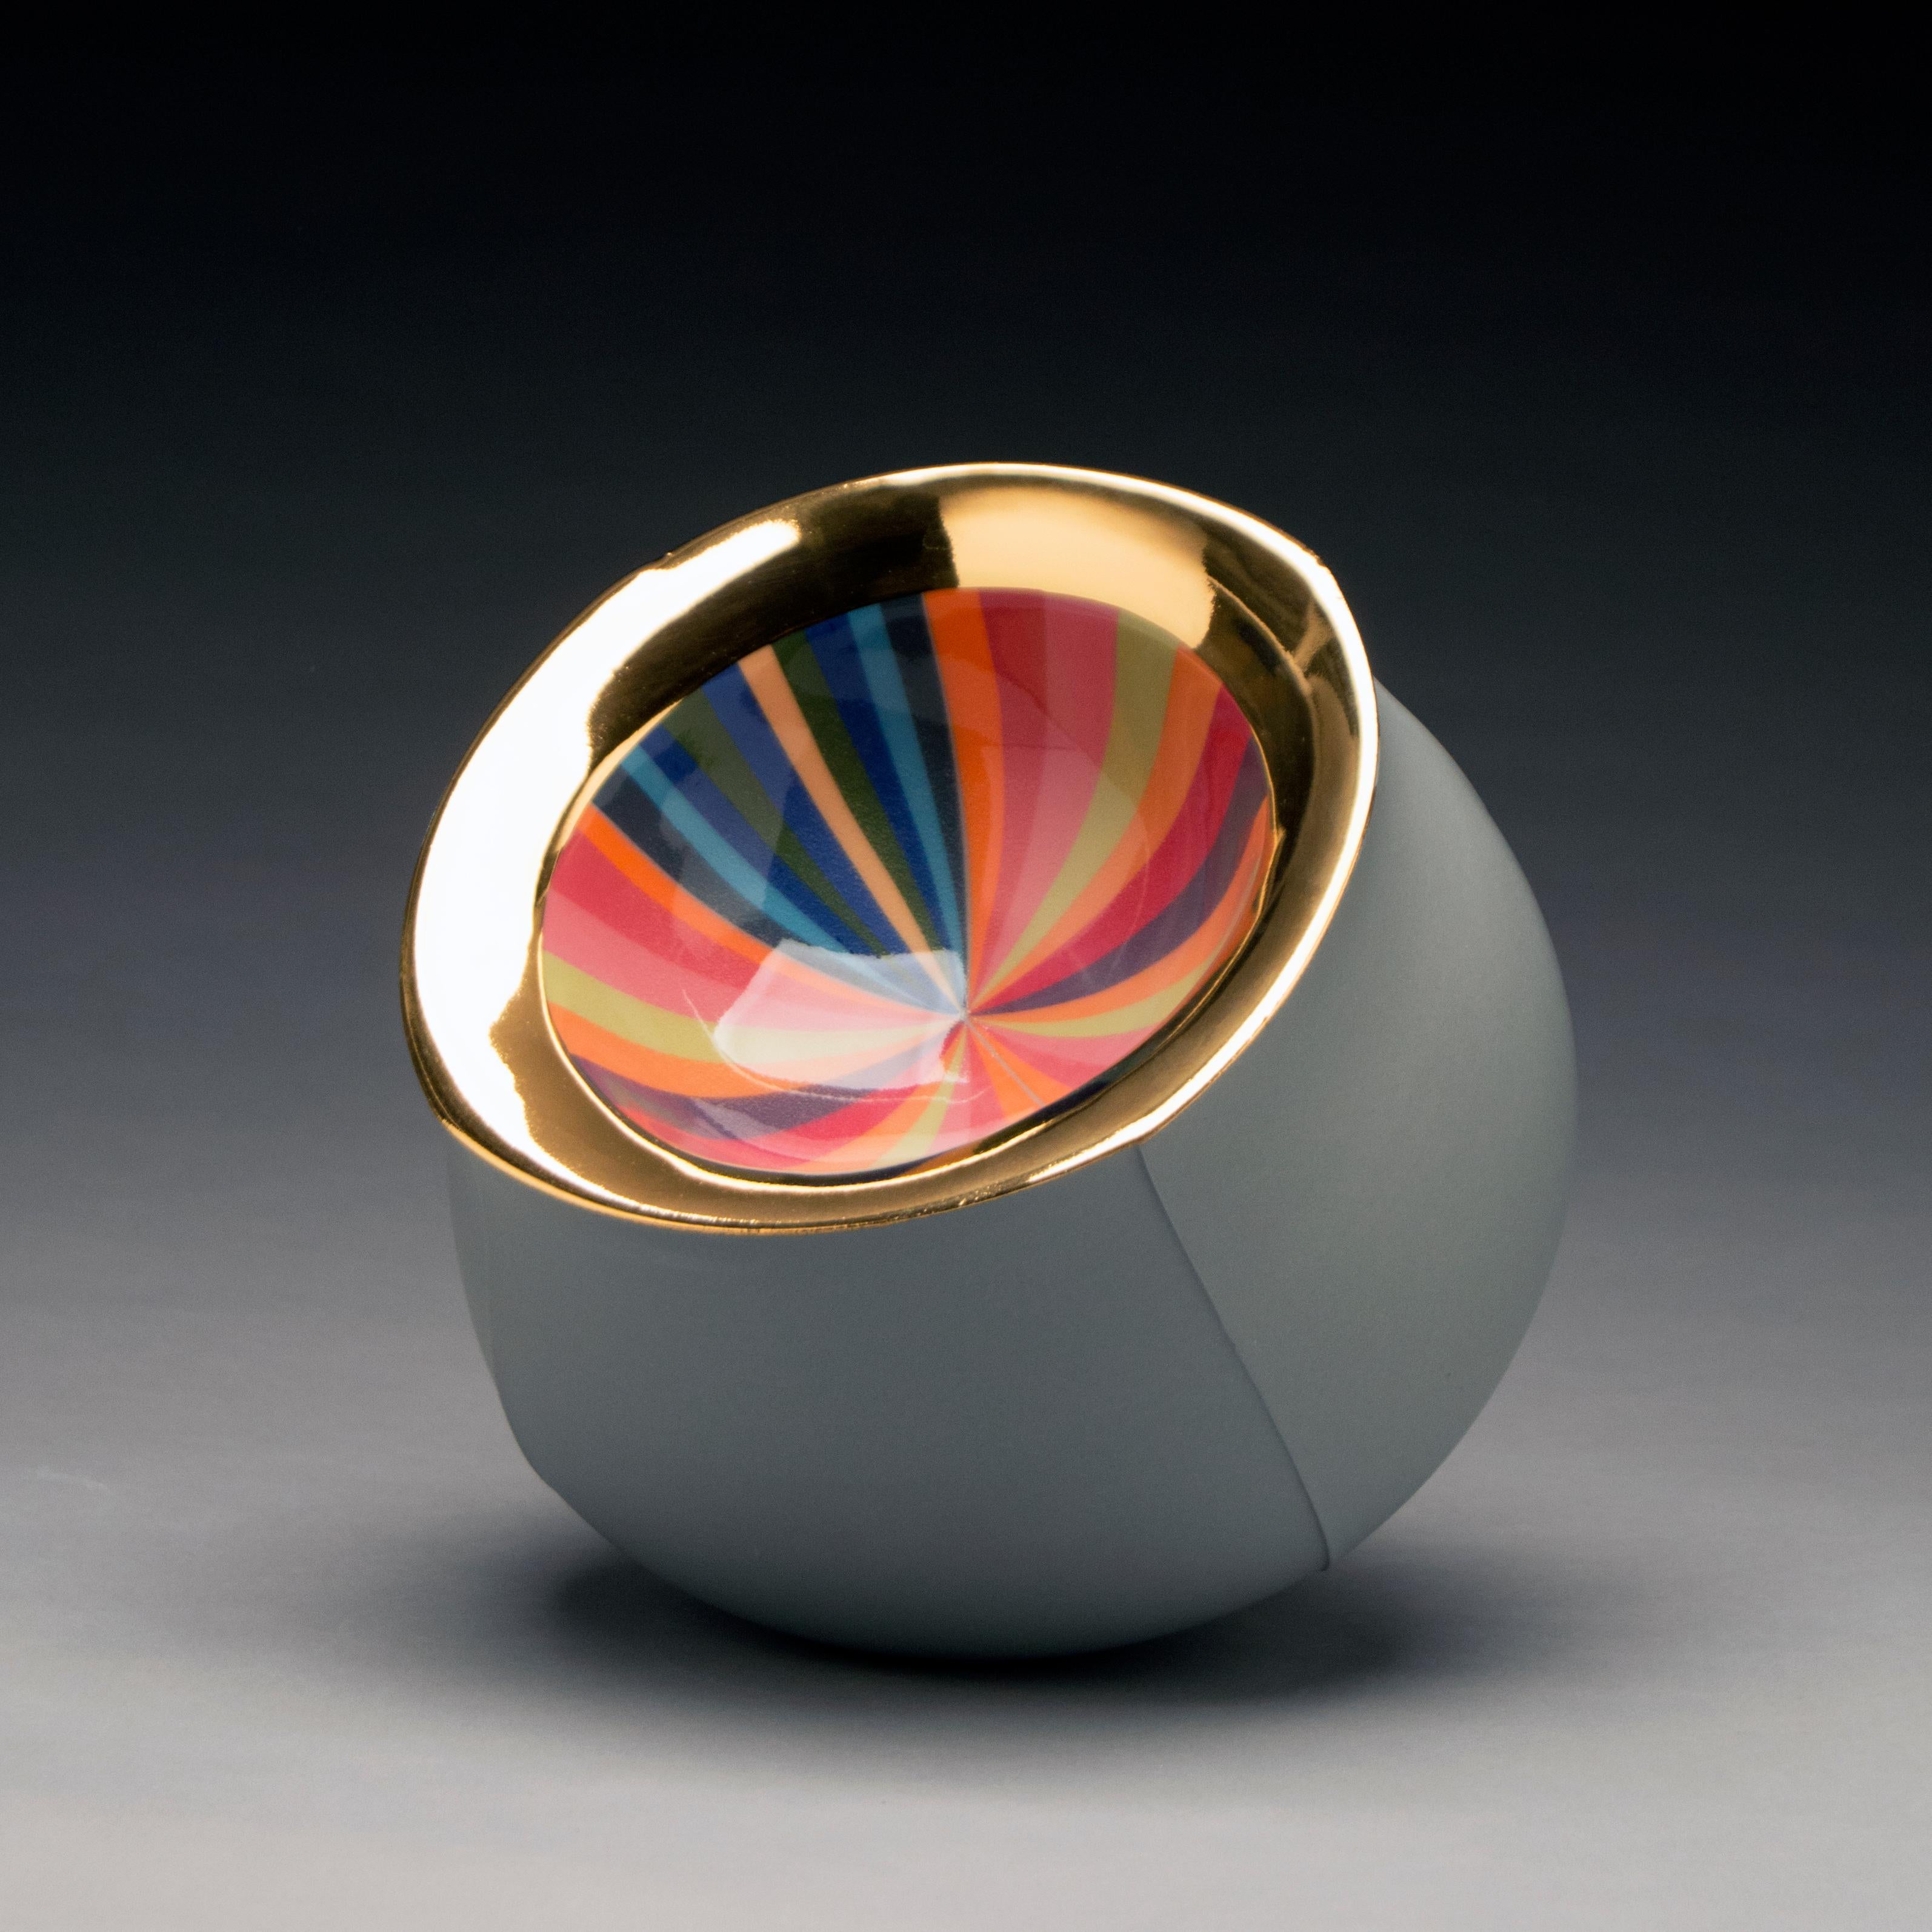 Peter Pincus Abstract Sculpture - Contemporary Design, Ceramic Bowl with Colorful Pattern and Gold Luster